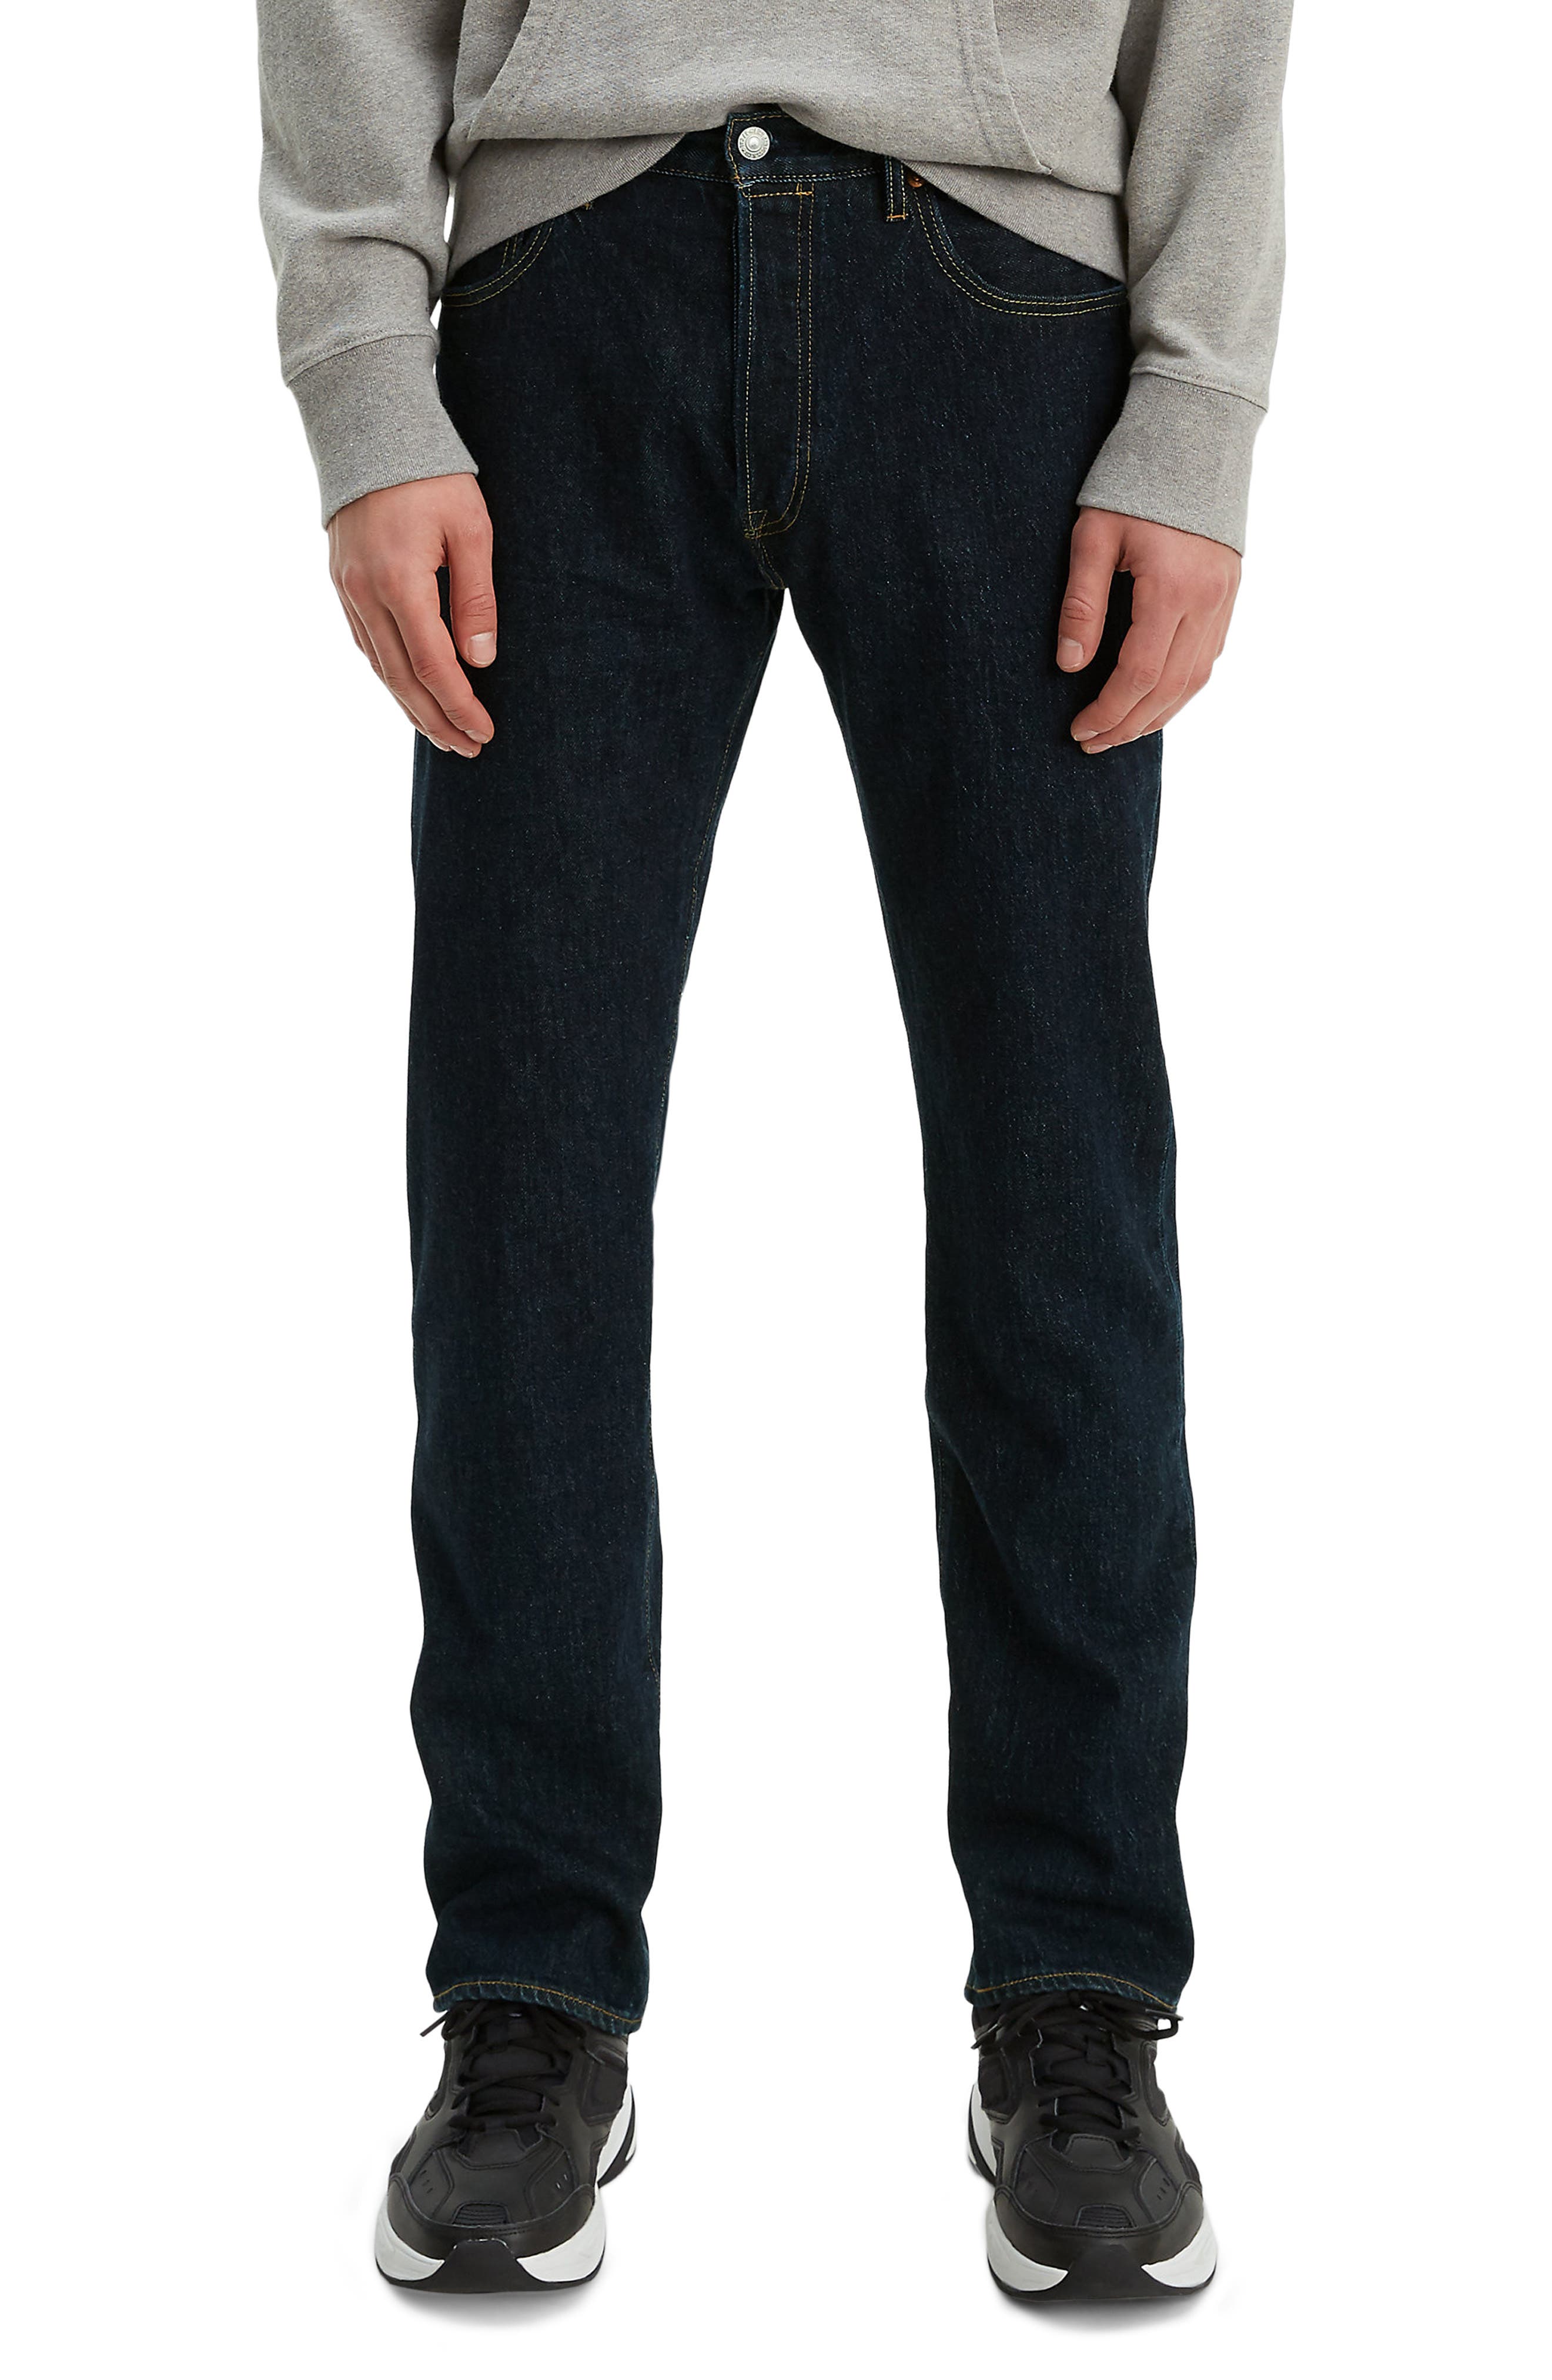 Levis 501 93 Clearance, SAVE 42% 